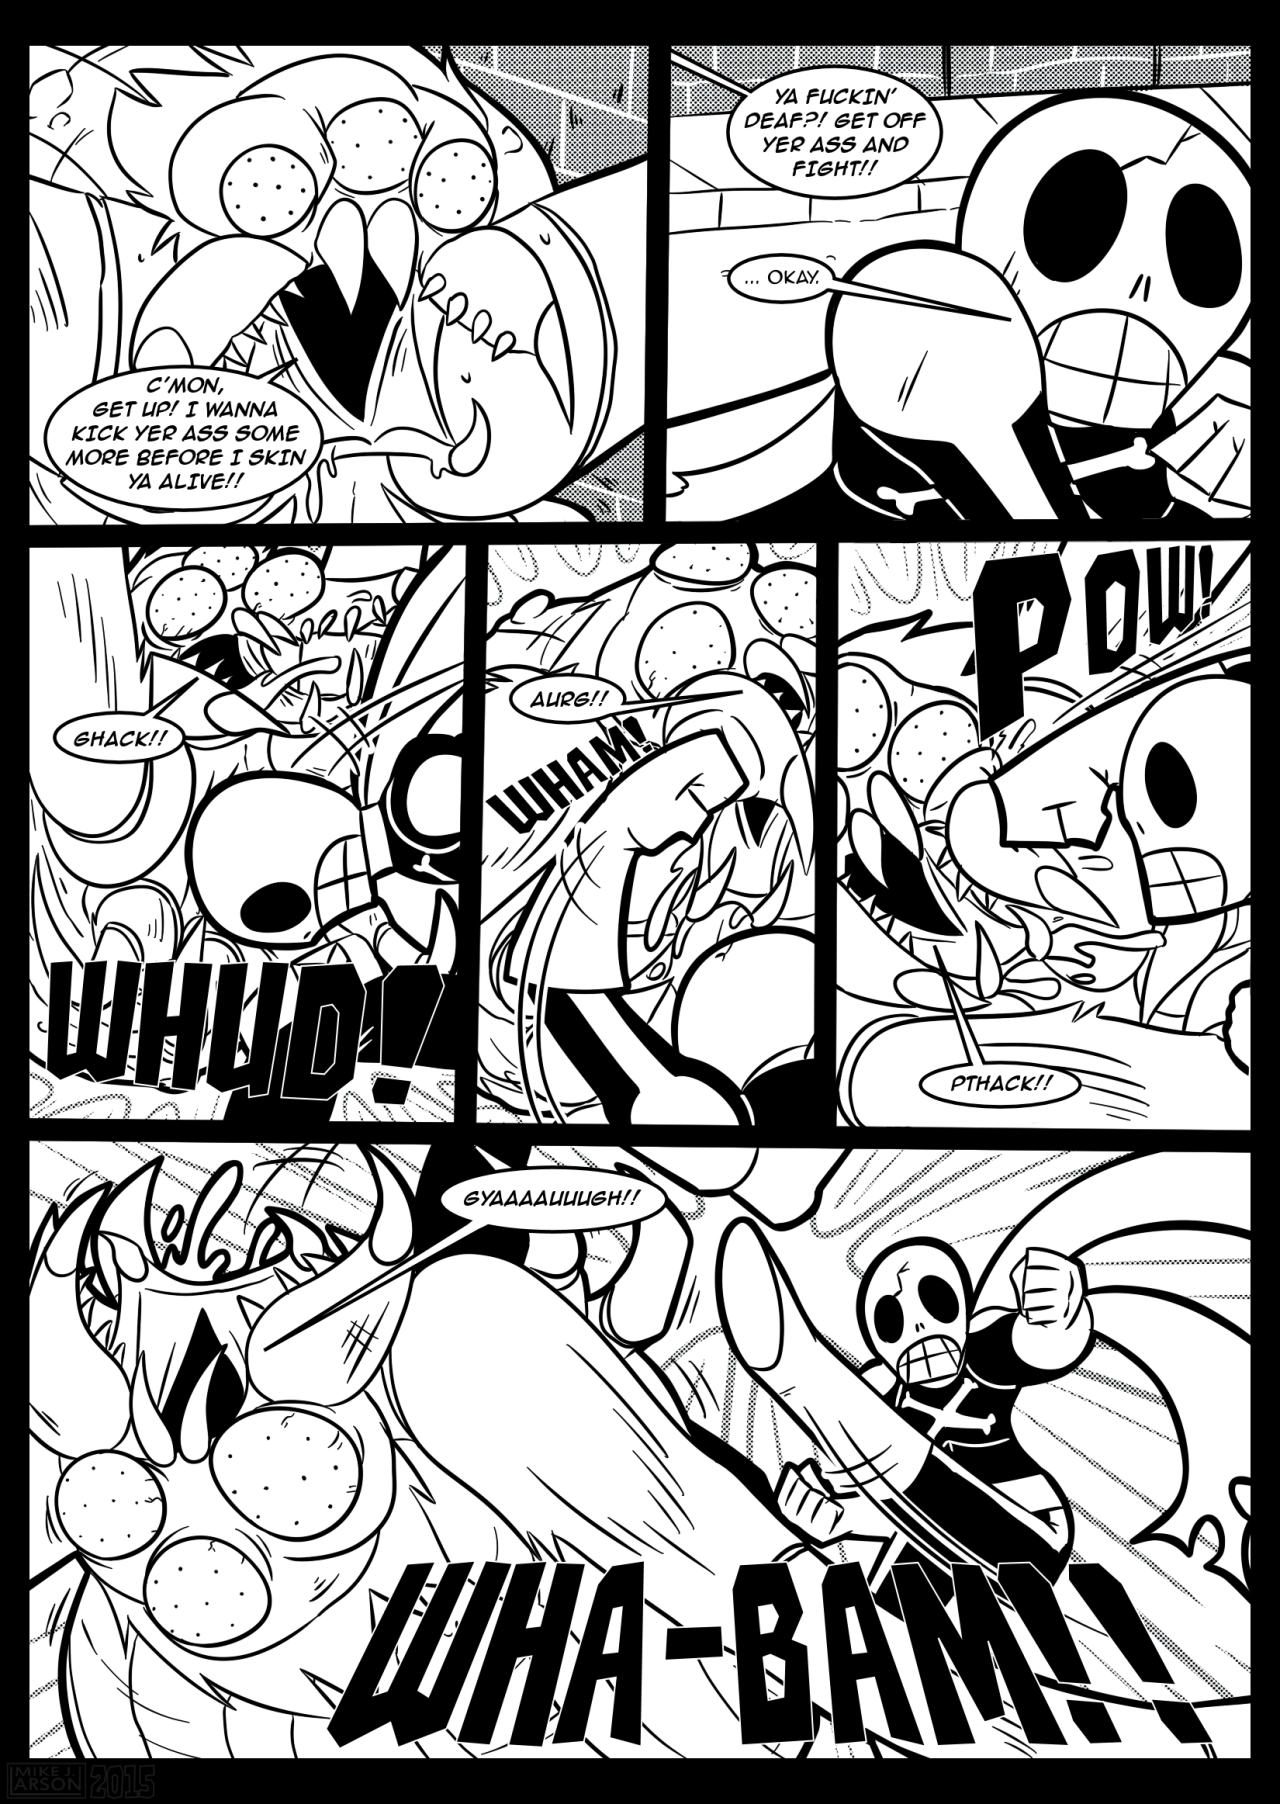 The first ten pages of a tokusatsu-inspired comic series I’m working on called